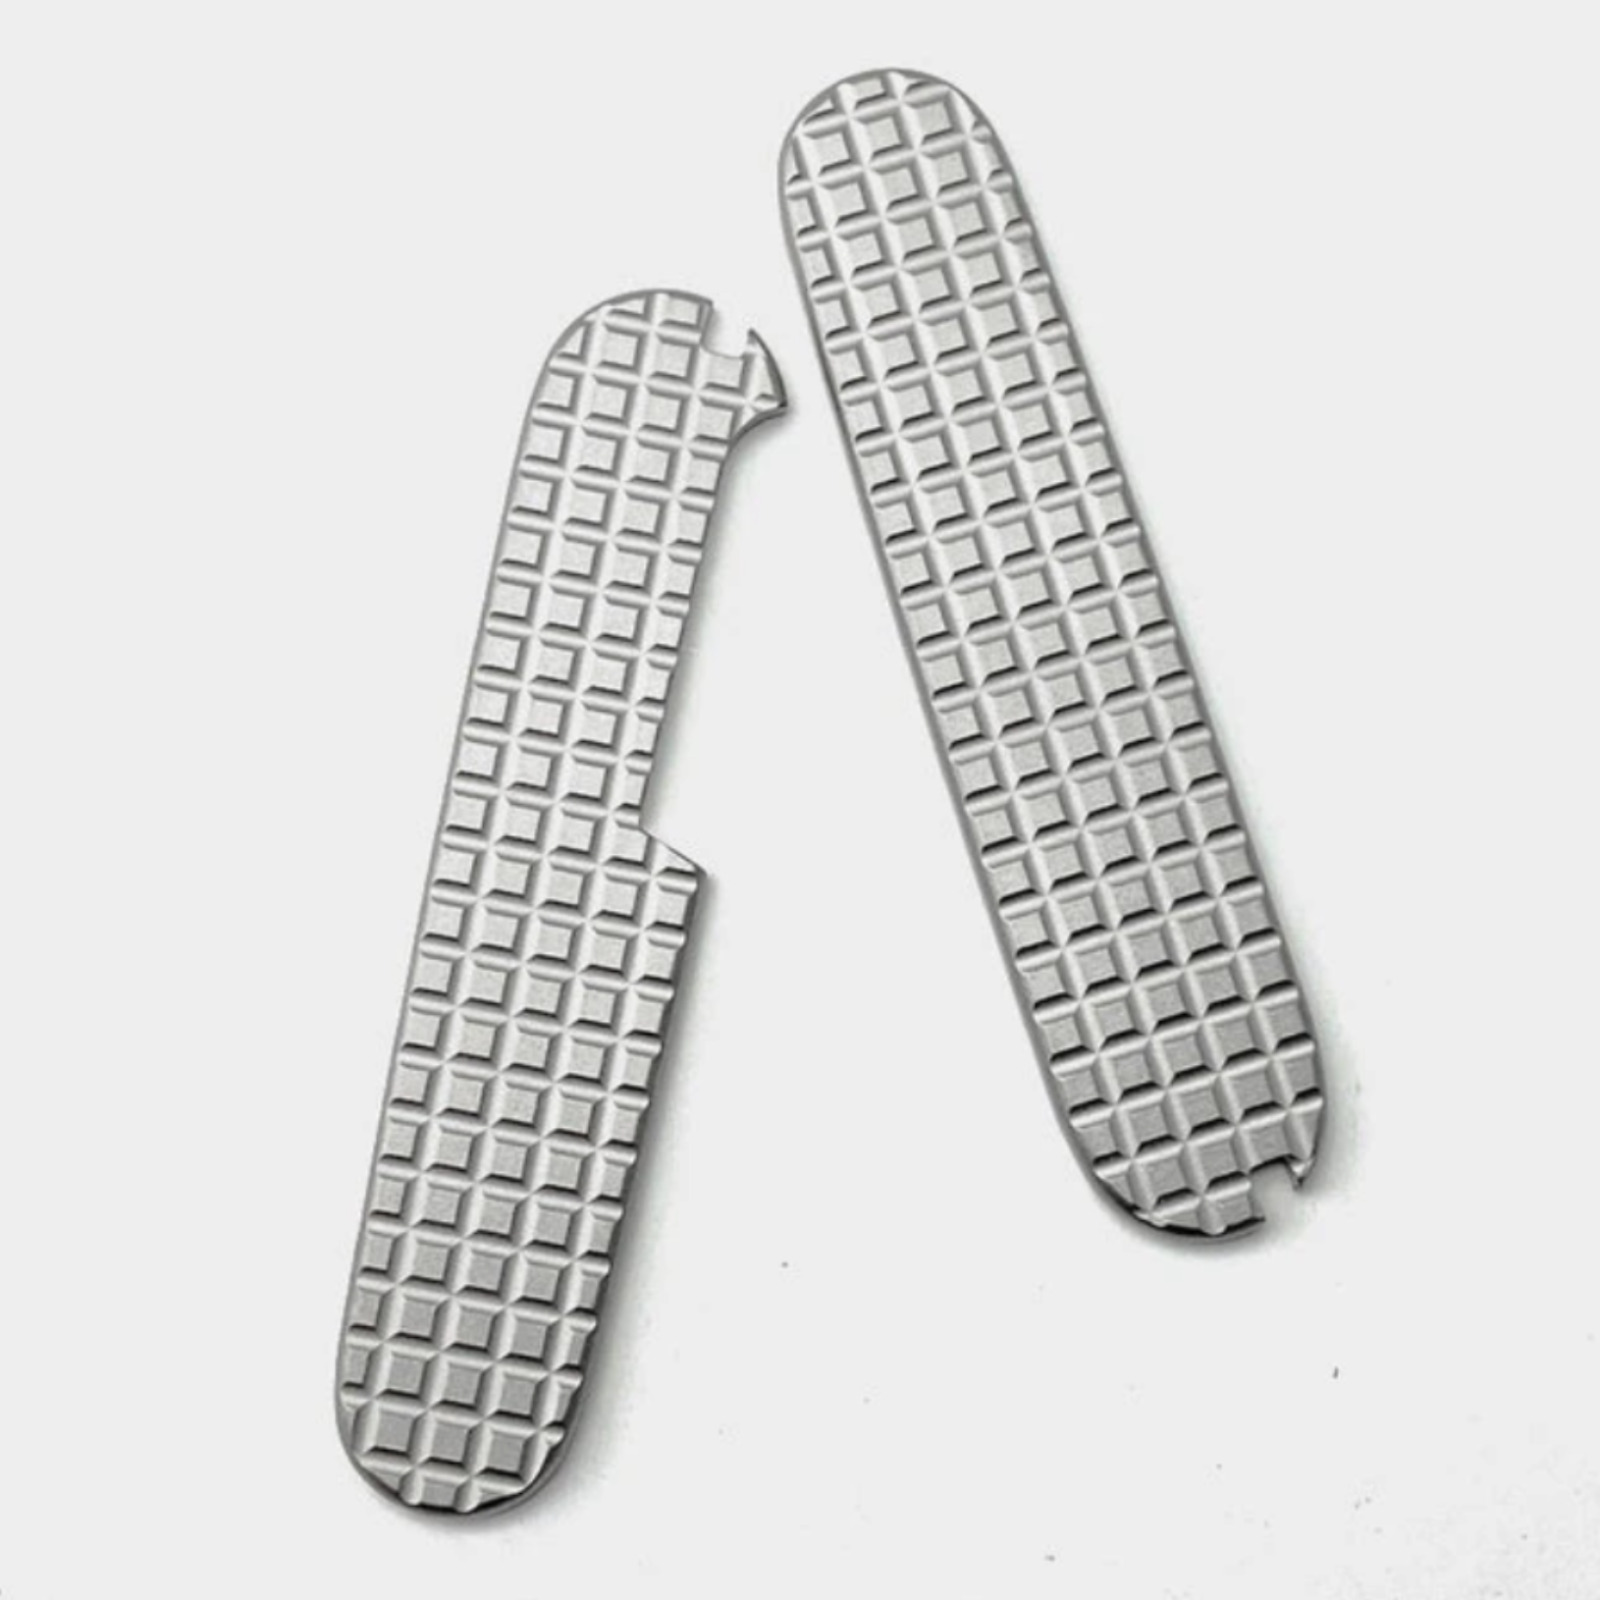 Victorinox 91mm Titanium Scales NEWEST Pattern Handle For Swiss Army Knife